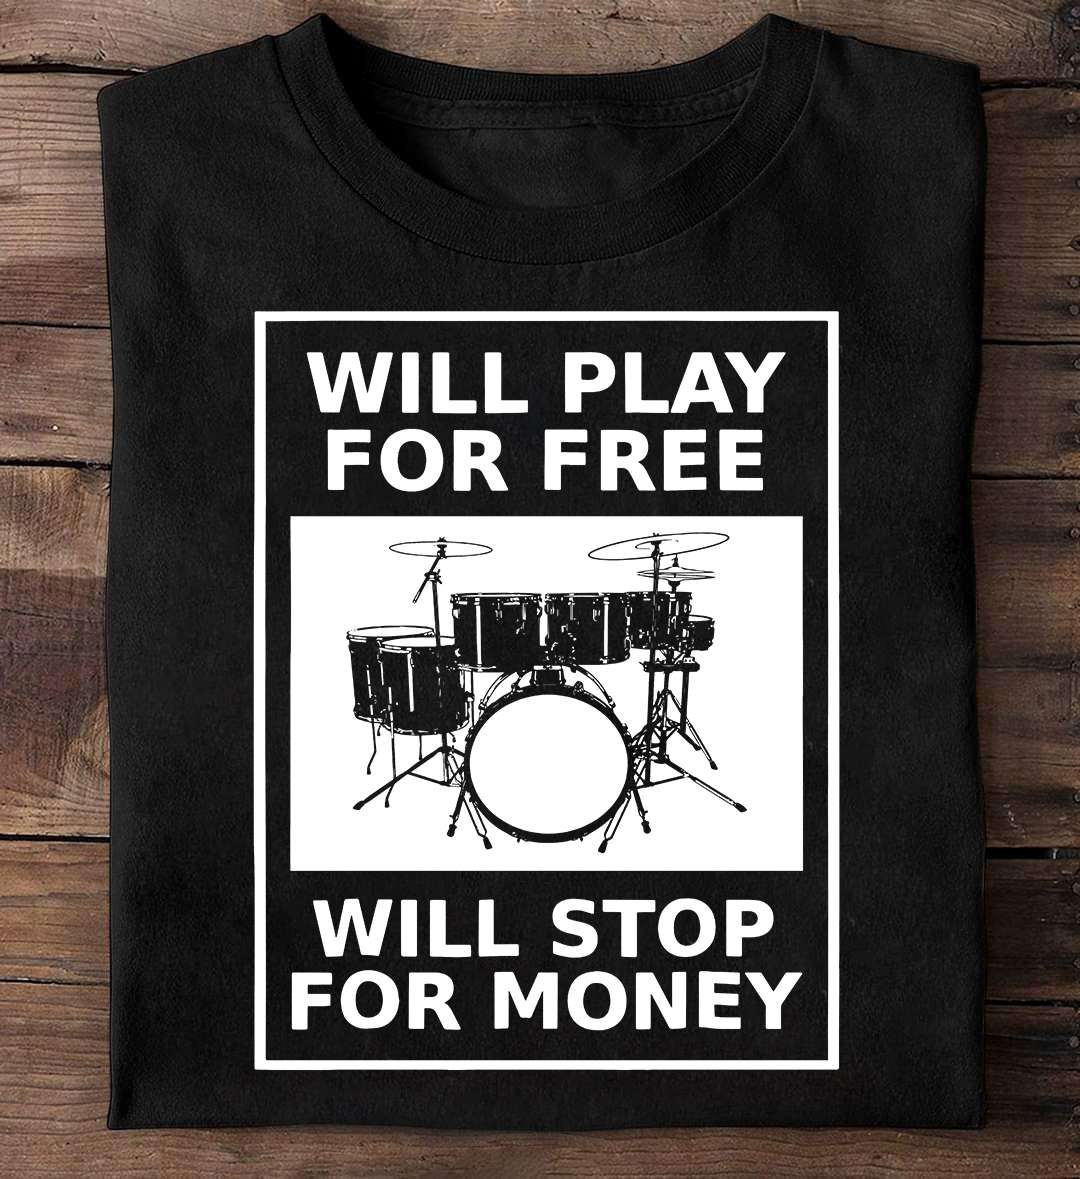 Will play for free will stop for money - Drum the intrument